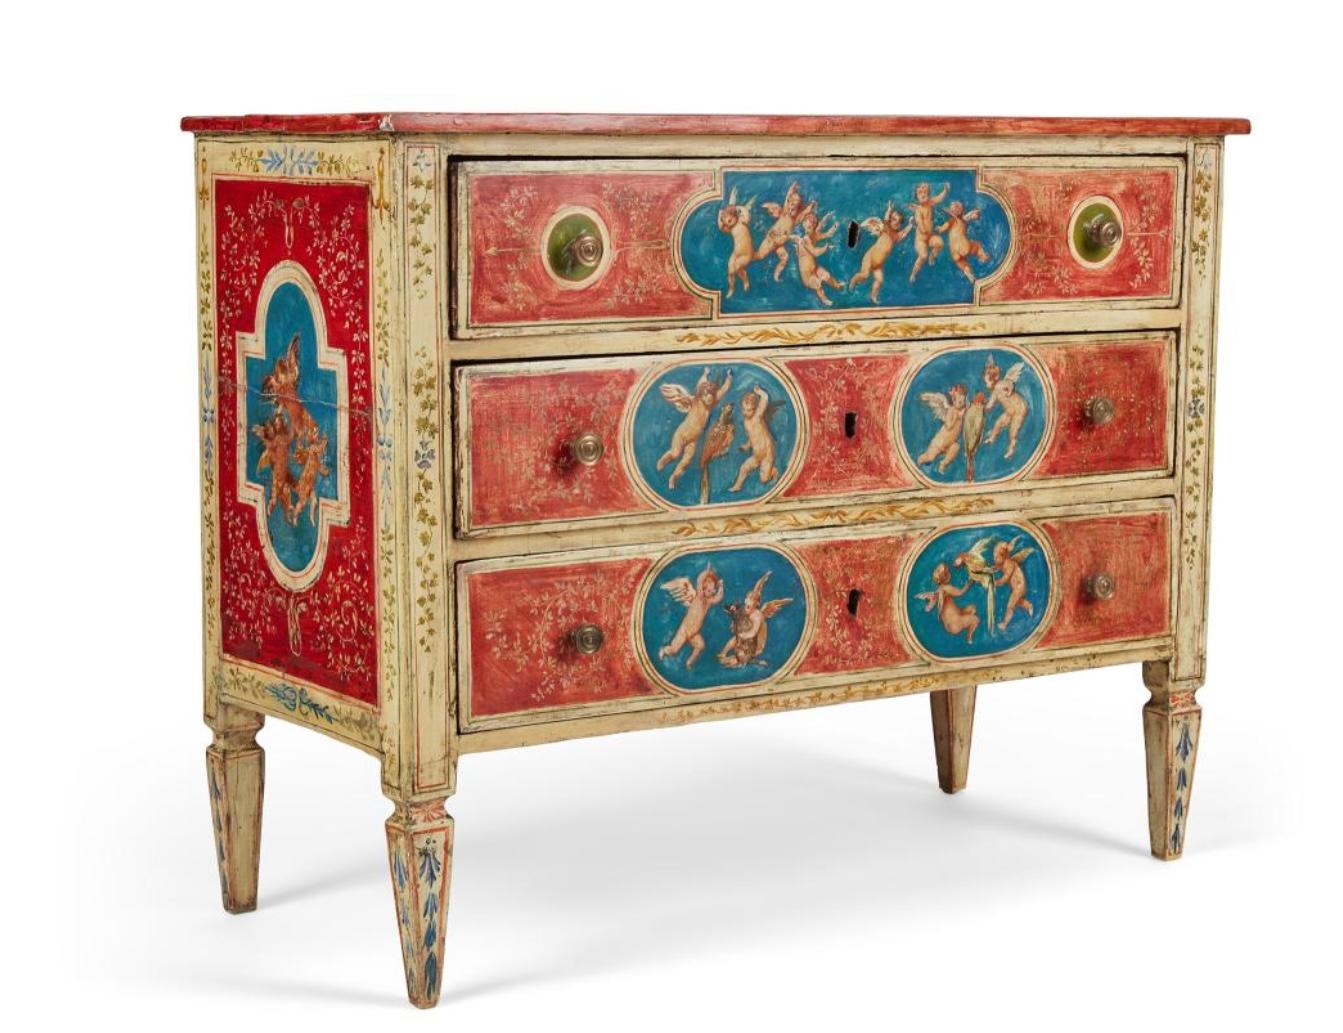 Polychromed 18th Century Italian Neoclassical Polychrome Decorated Commode For Sale